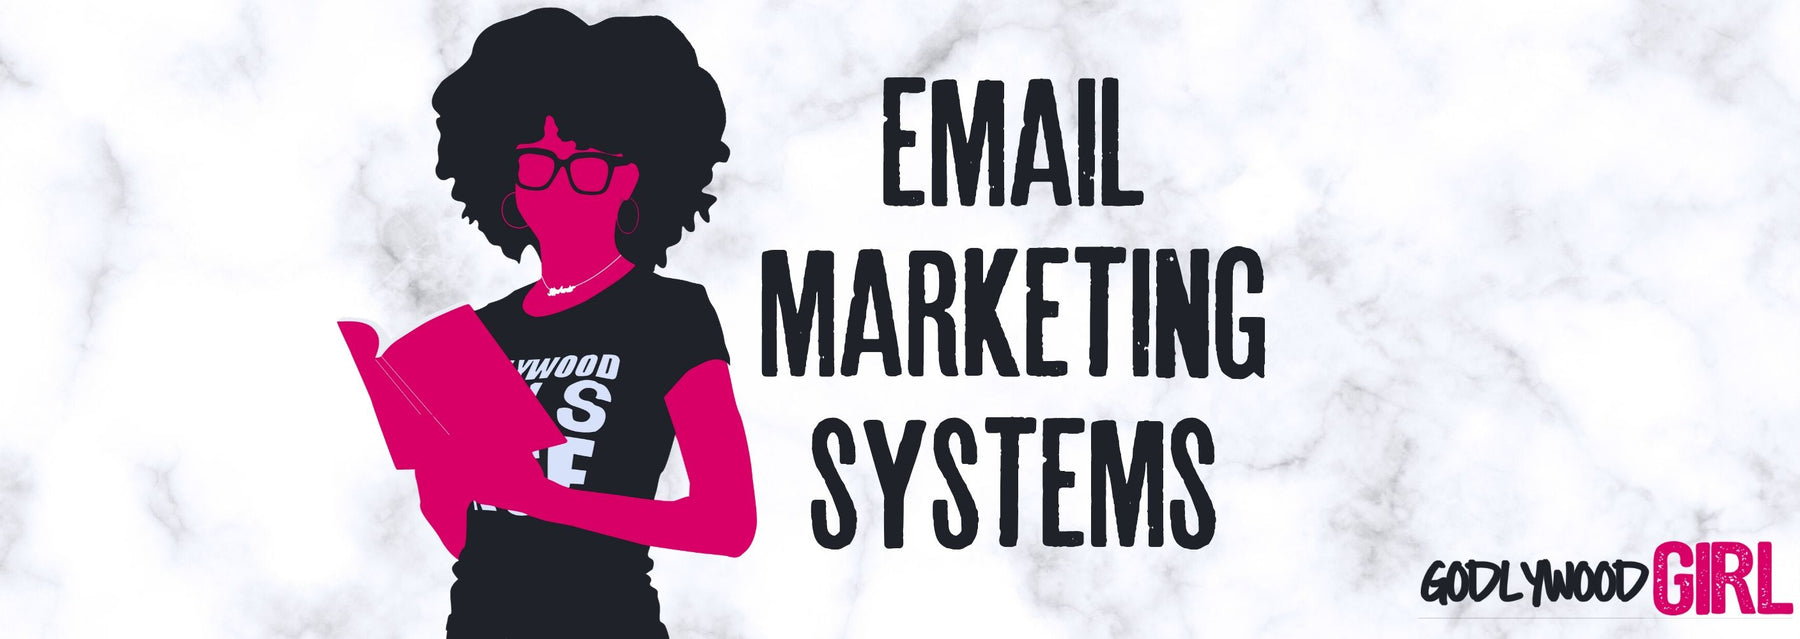 EMAIL MARKETING SYSTEMS (Best Email Marketing Software 2020 Review!)